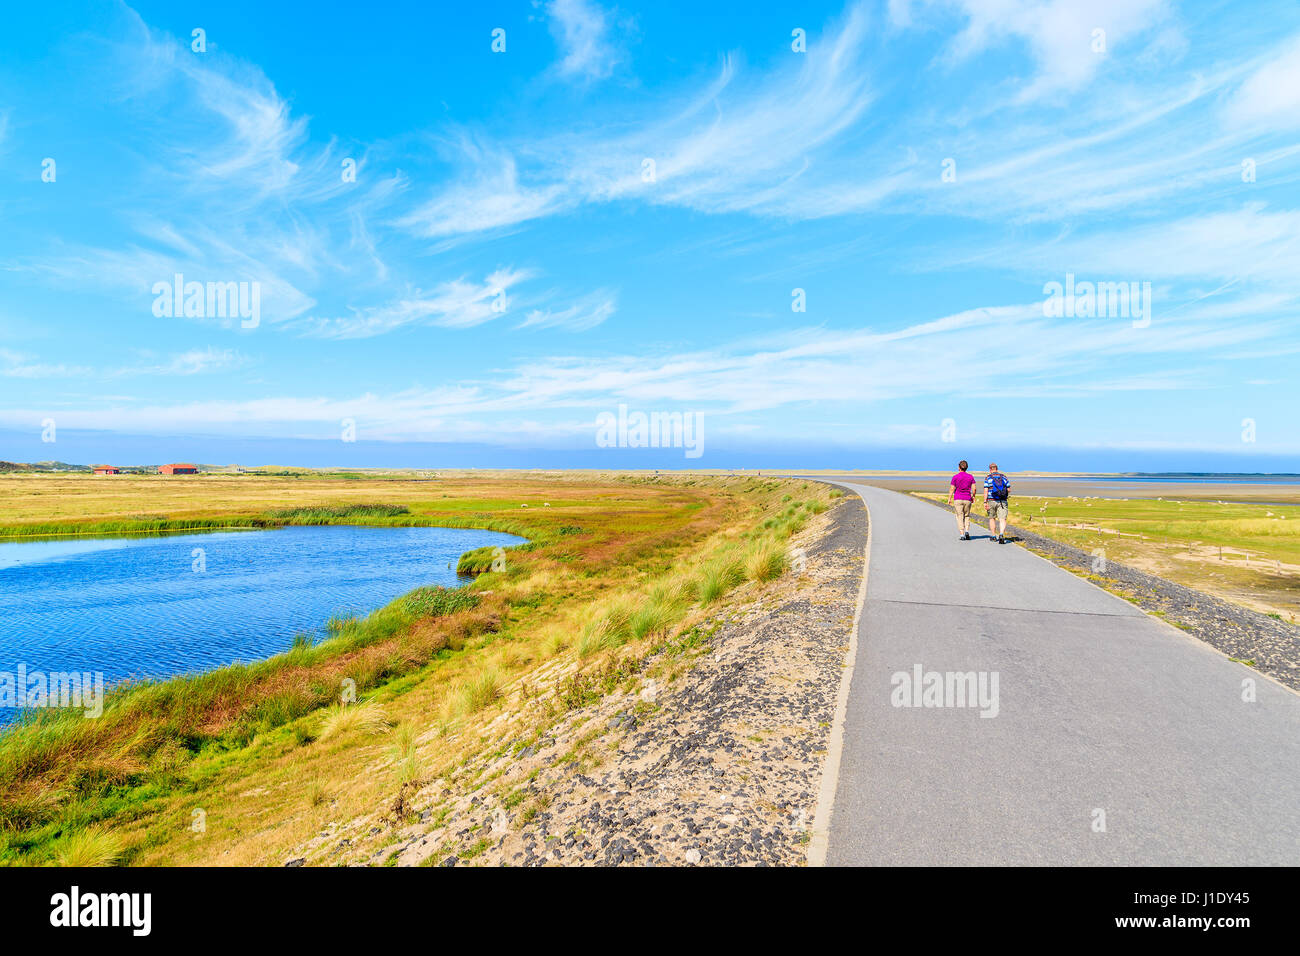 Couple of tourists walking on footpath in countryside landscape of Sylt island near List village, Germany Stock Photo